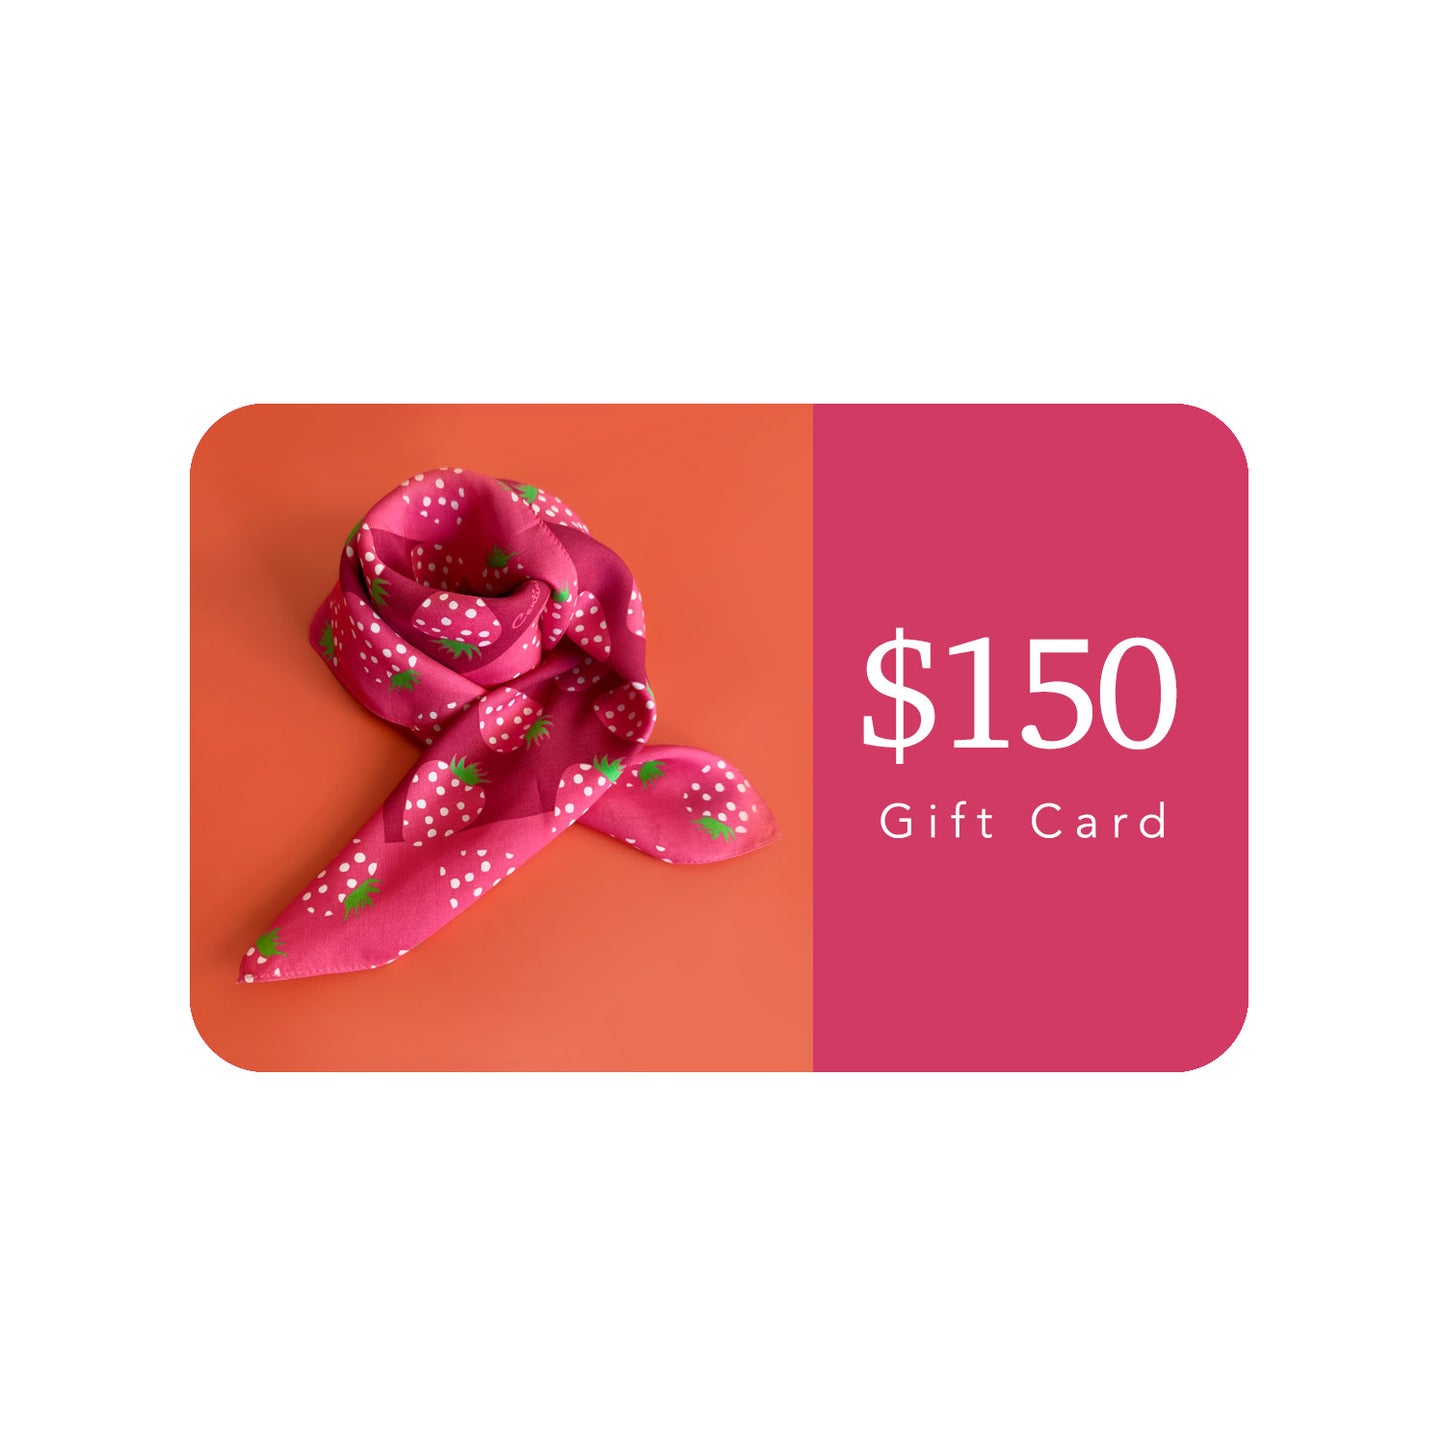 Centinelle gift card with 150 dollars value.